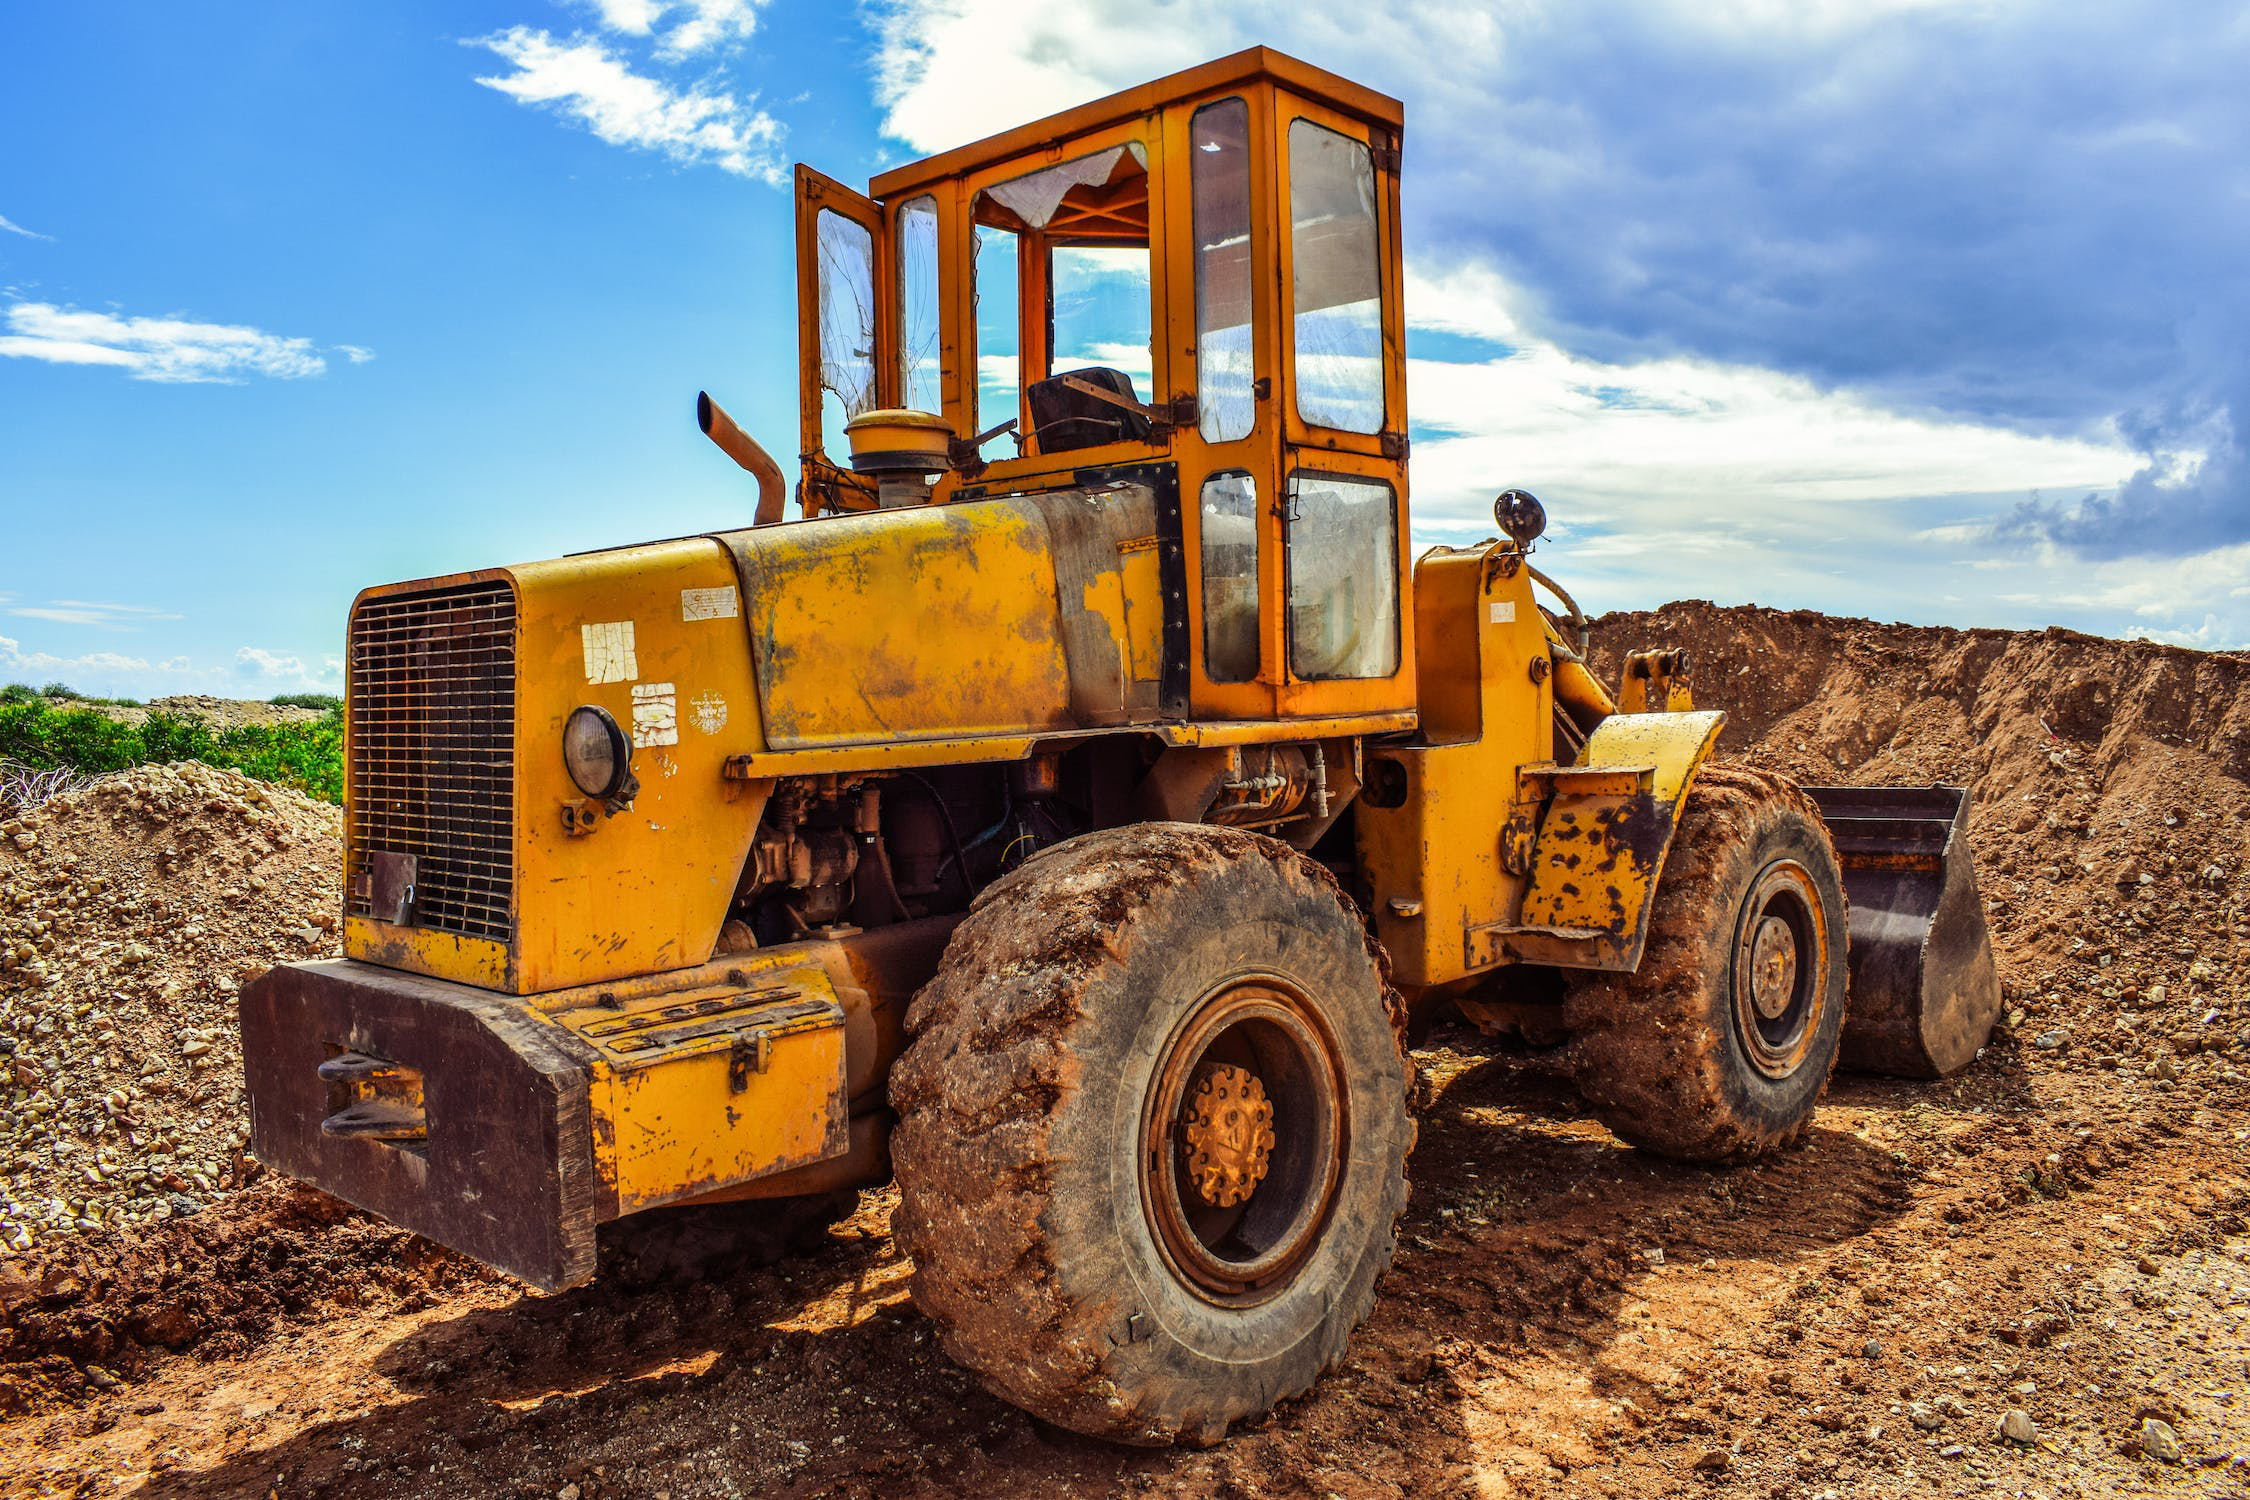 You are currently viewing “All aboard! :The Benefits of Remote-Controlled Heavy Equipment”